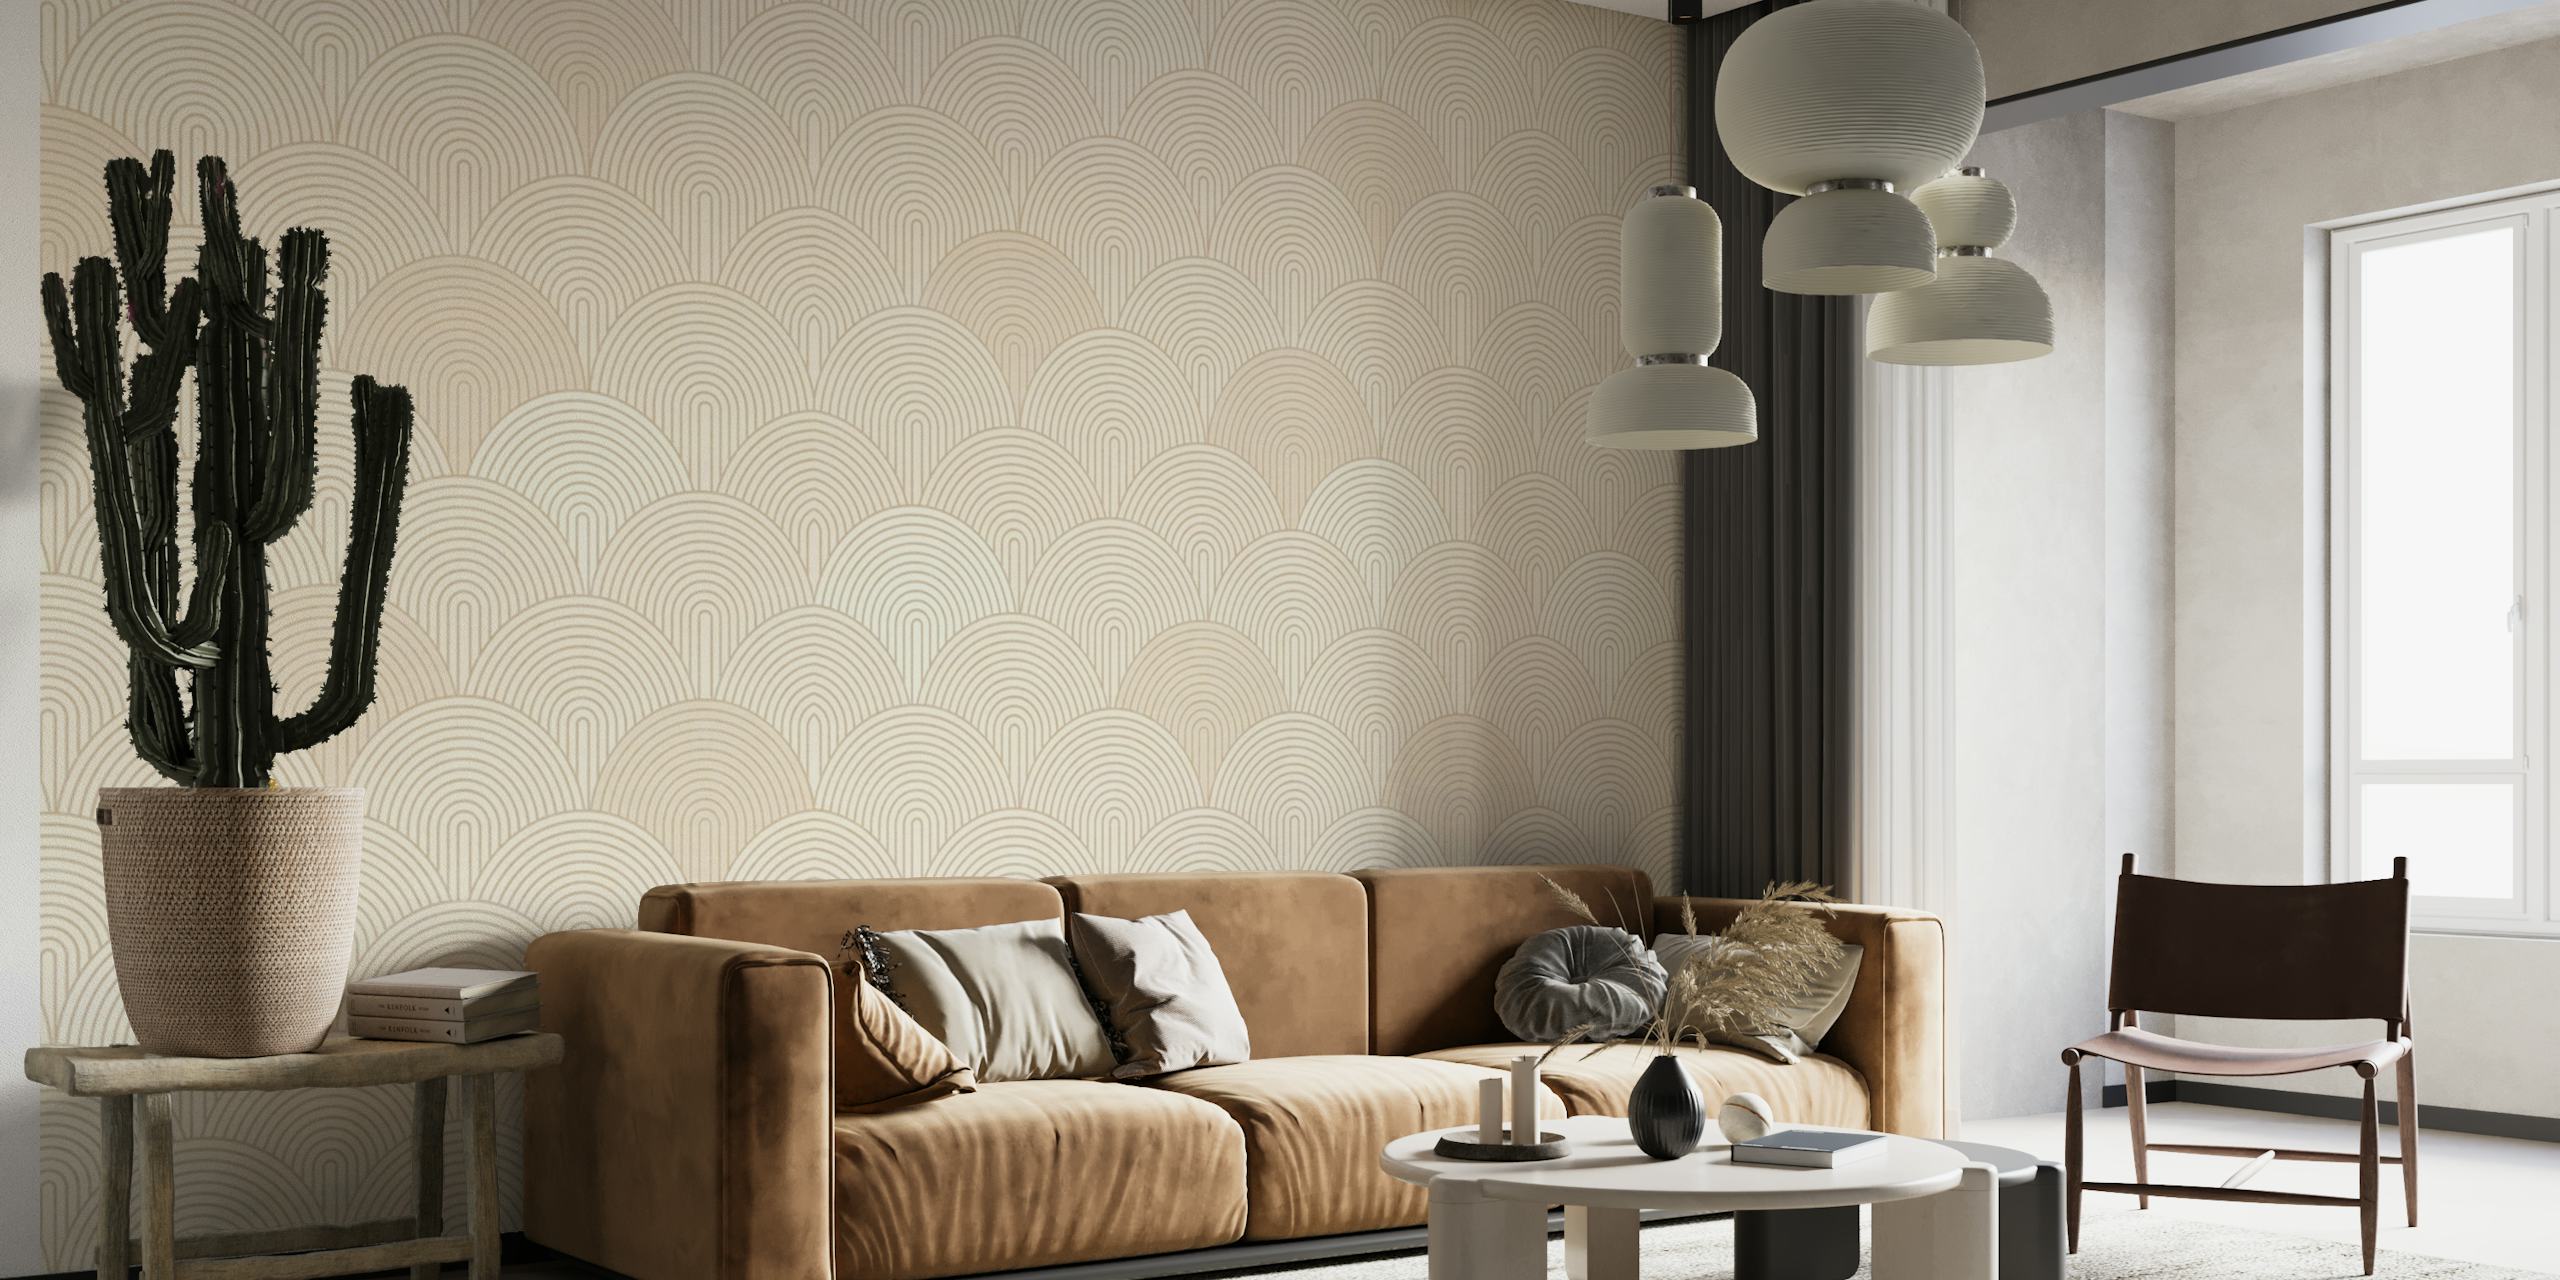 Boho geo arches pattern on a sand-colored wall mural